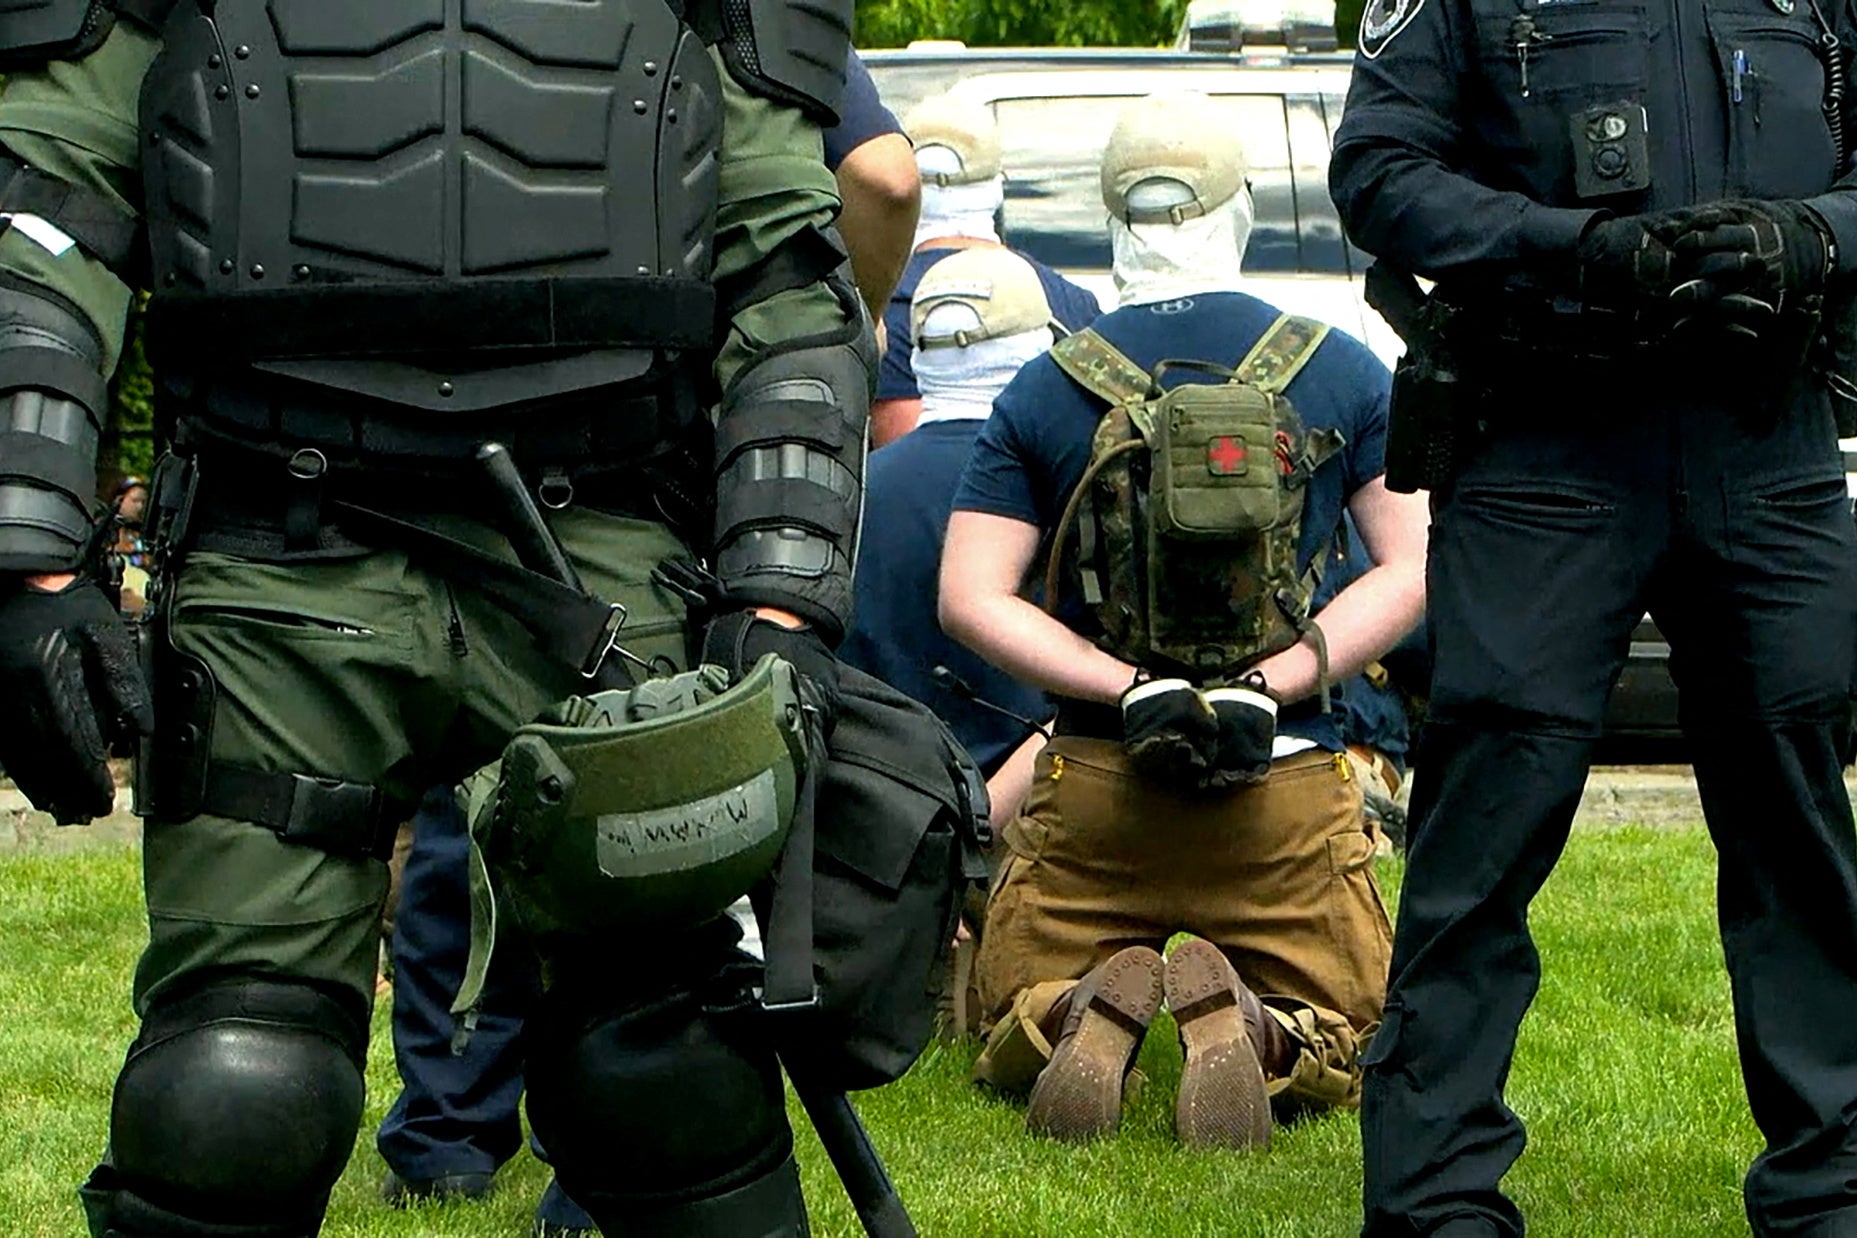 Several men seen from the back wearing baseball caps and white head coverings kneel on the grass in handcuffs surrounded by police in riot gear